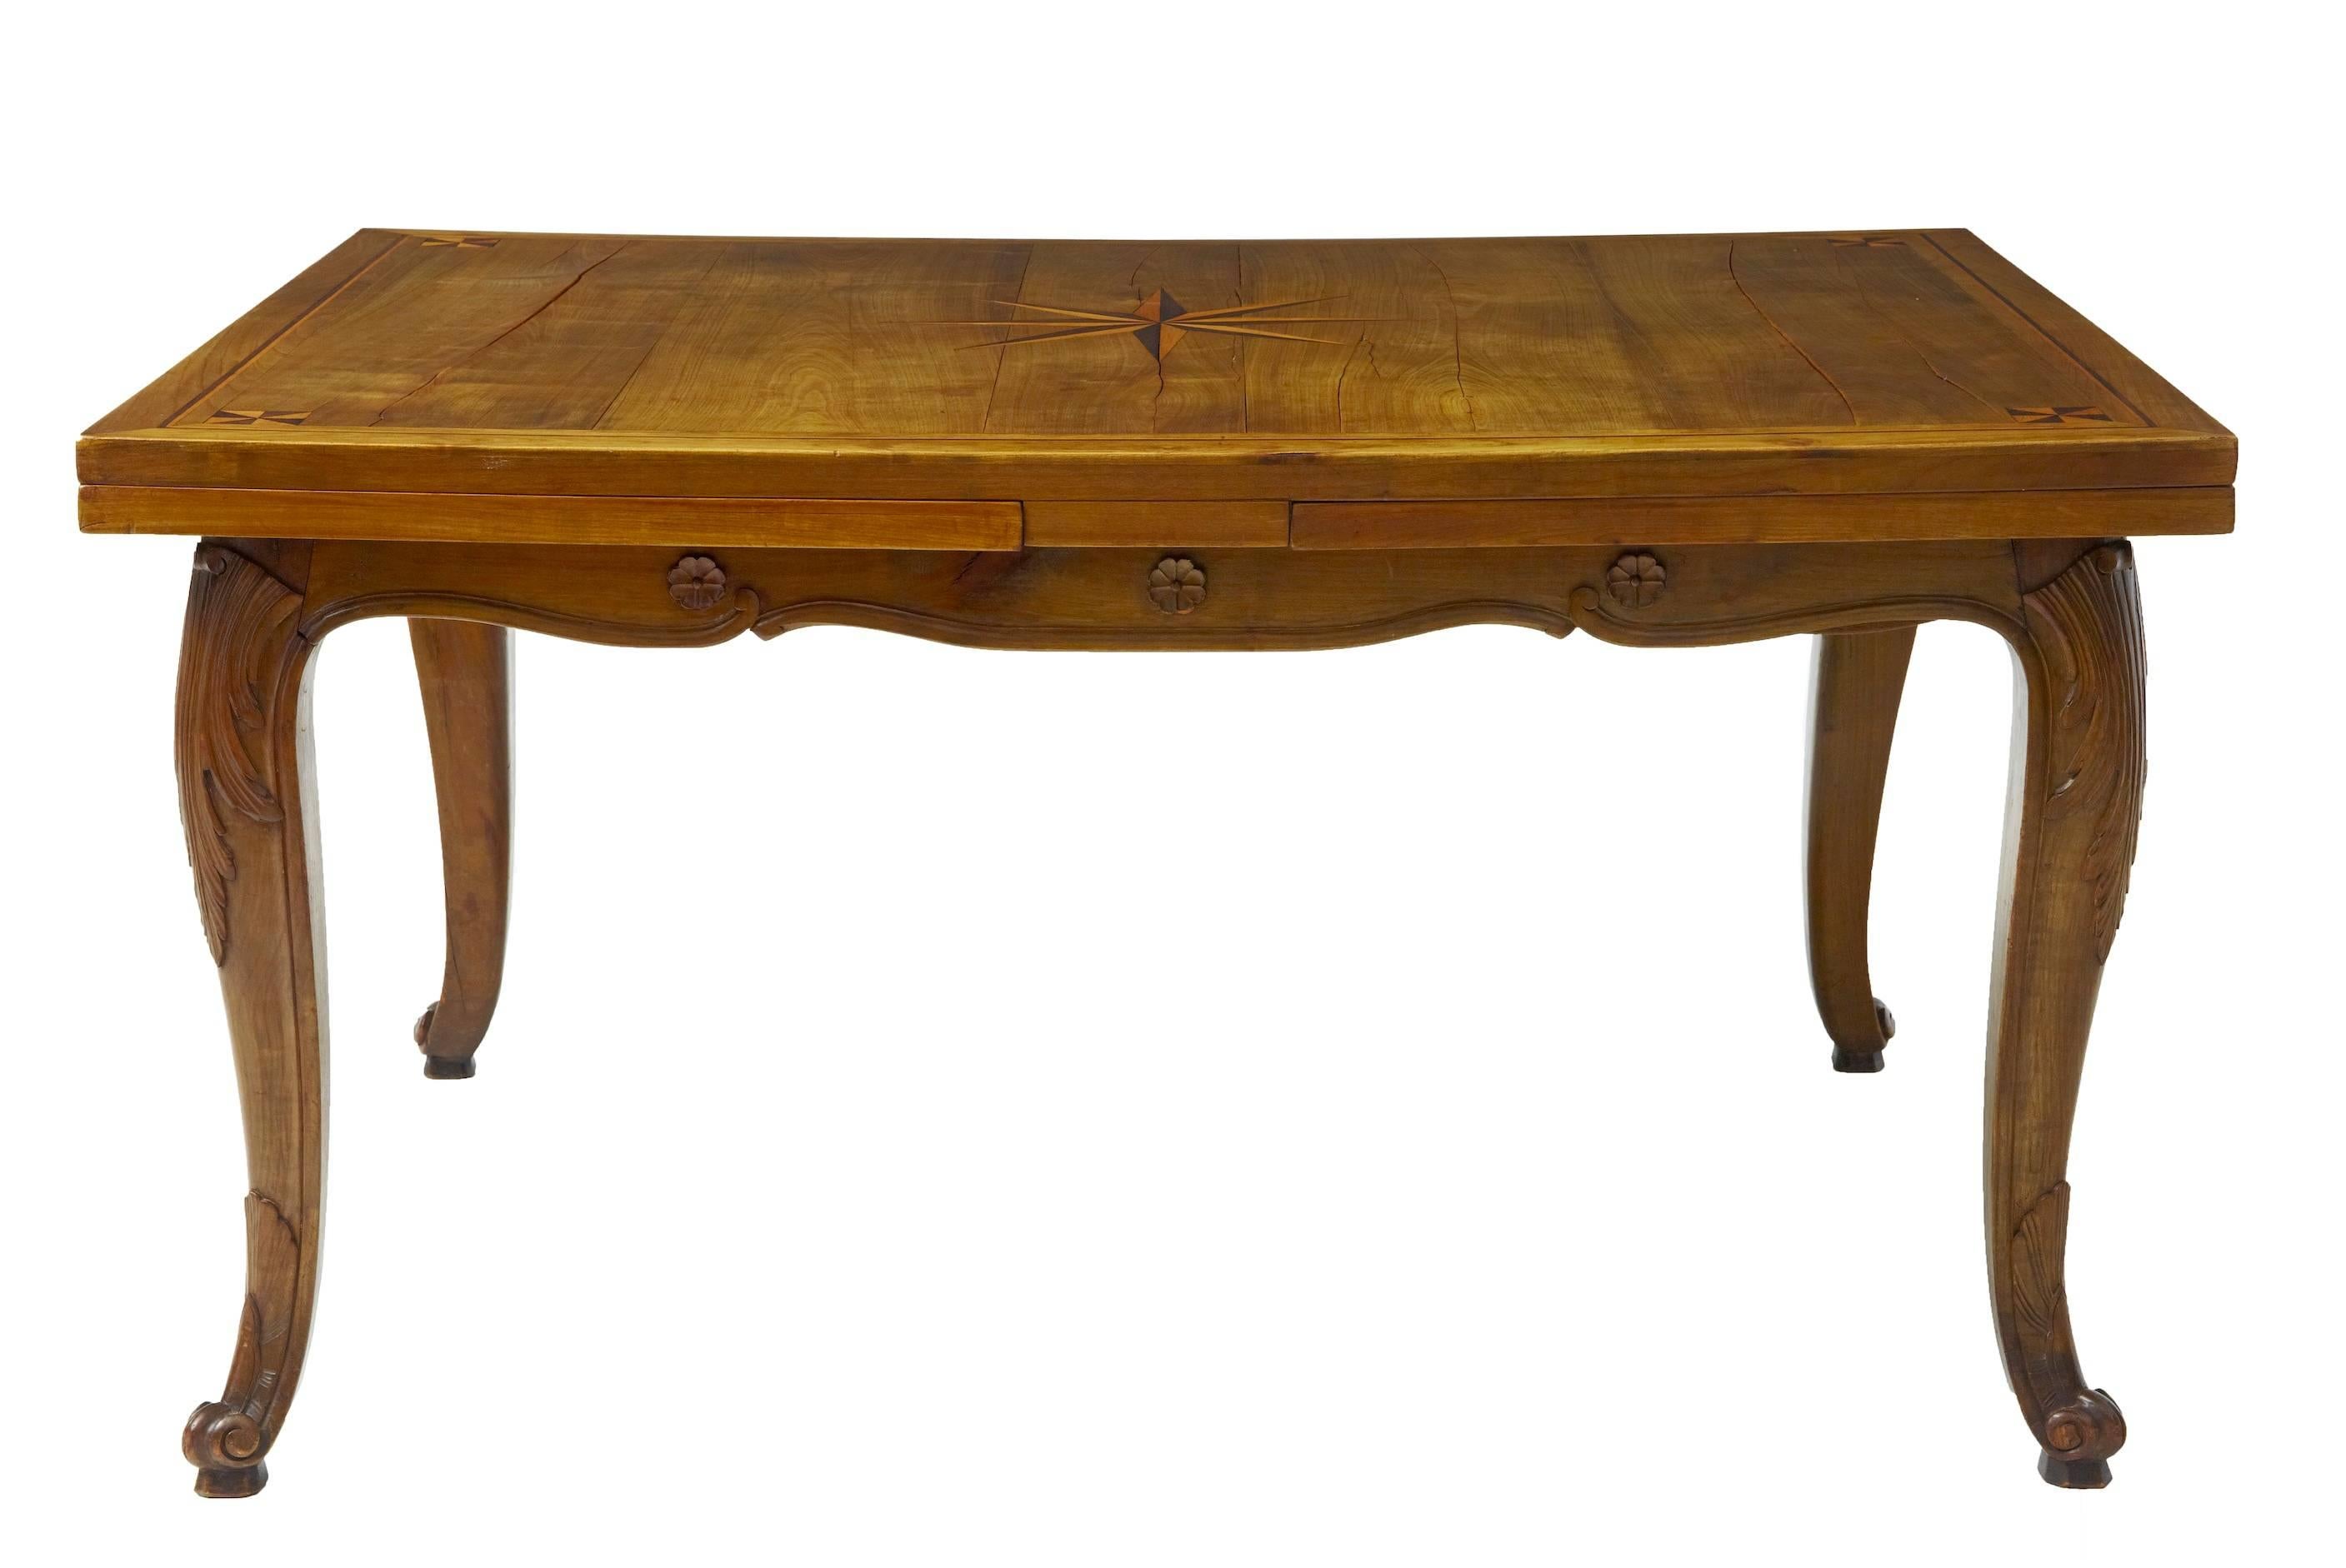 Good character French farmhouse draw leaf table, circa 1880.
Inlaid star to centre and squares to each corner.
Carved apron and legs.
Age splits to top which do not effect the structural integrity.
Please see pictures

Measures: Height